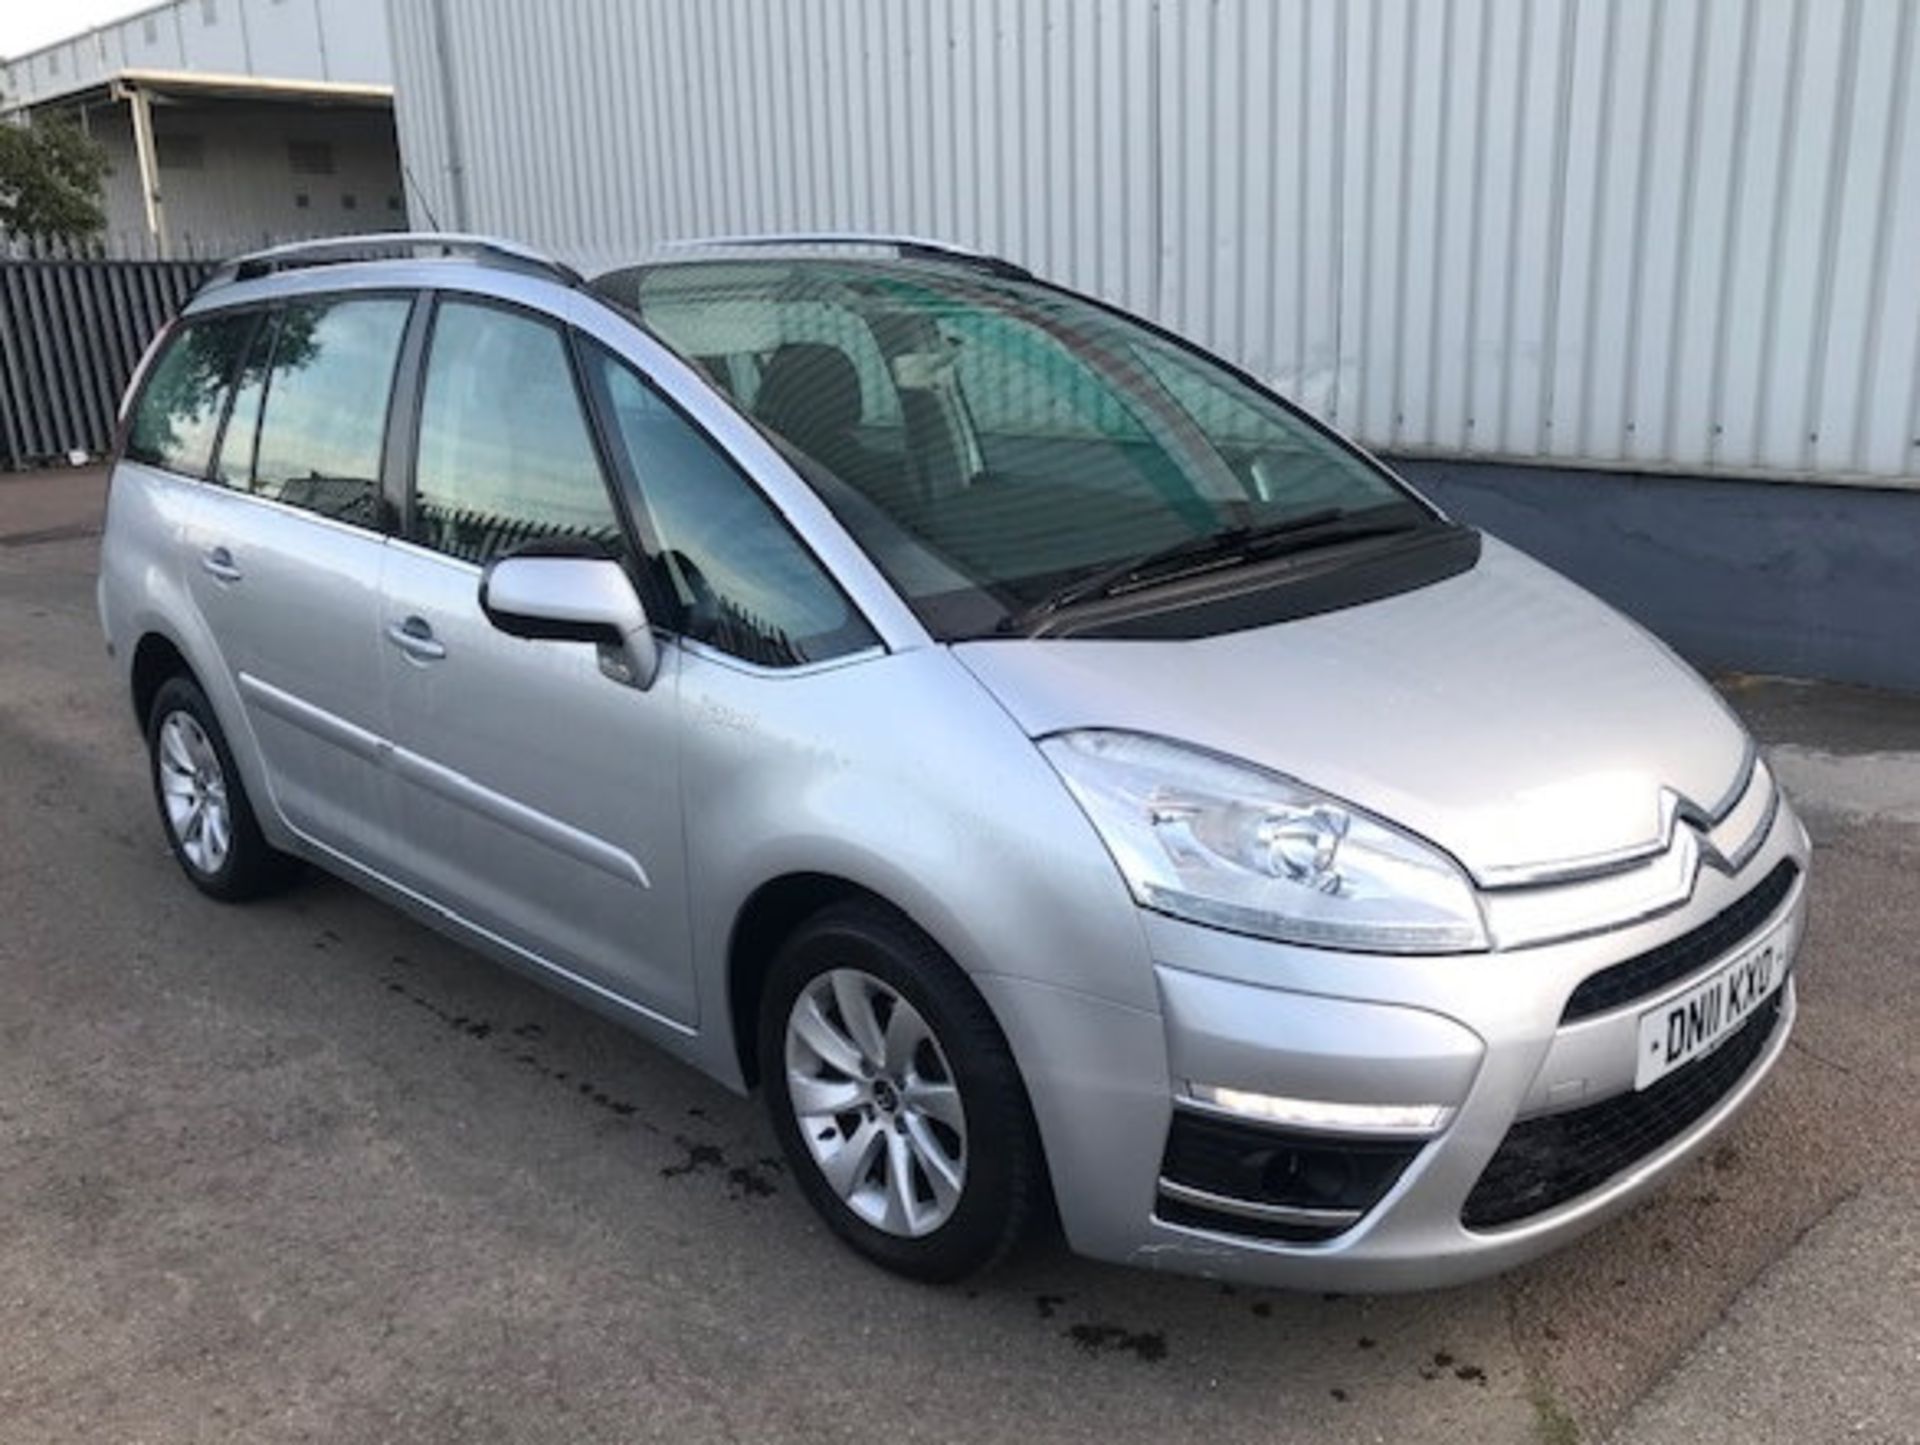 2011 Citroen C4 Grand Picasso 1.6 Hdi VTR+ 5Dr MPV - CL505 - NO VAT ON THE HAMMER - Location: Corby,